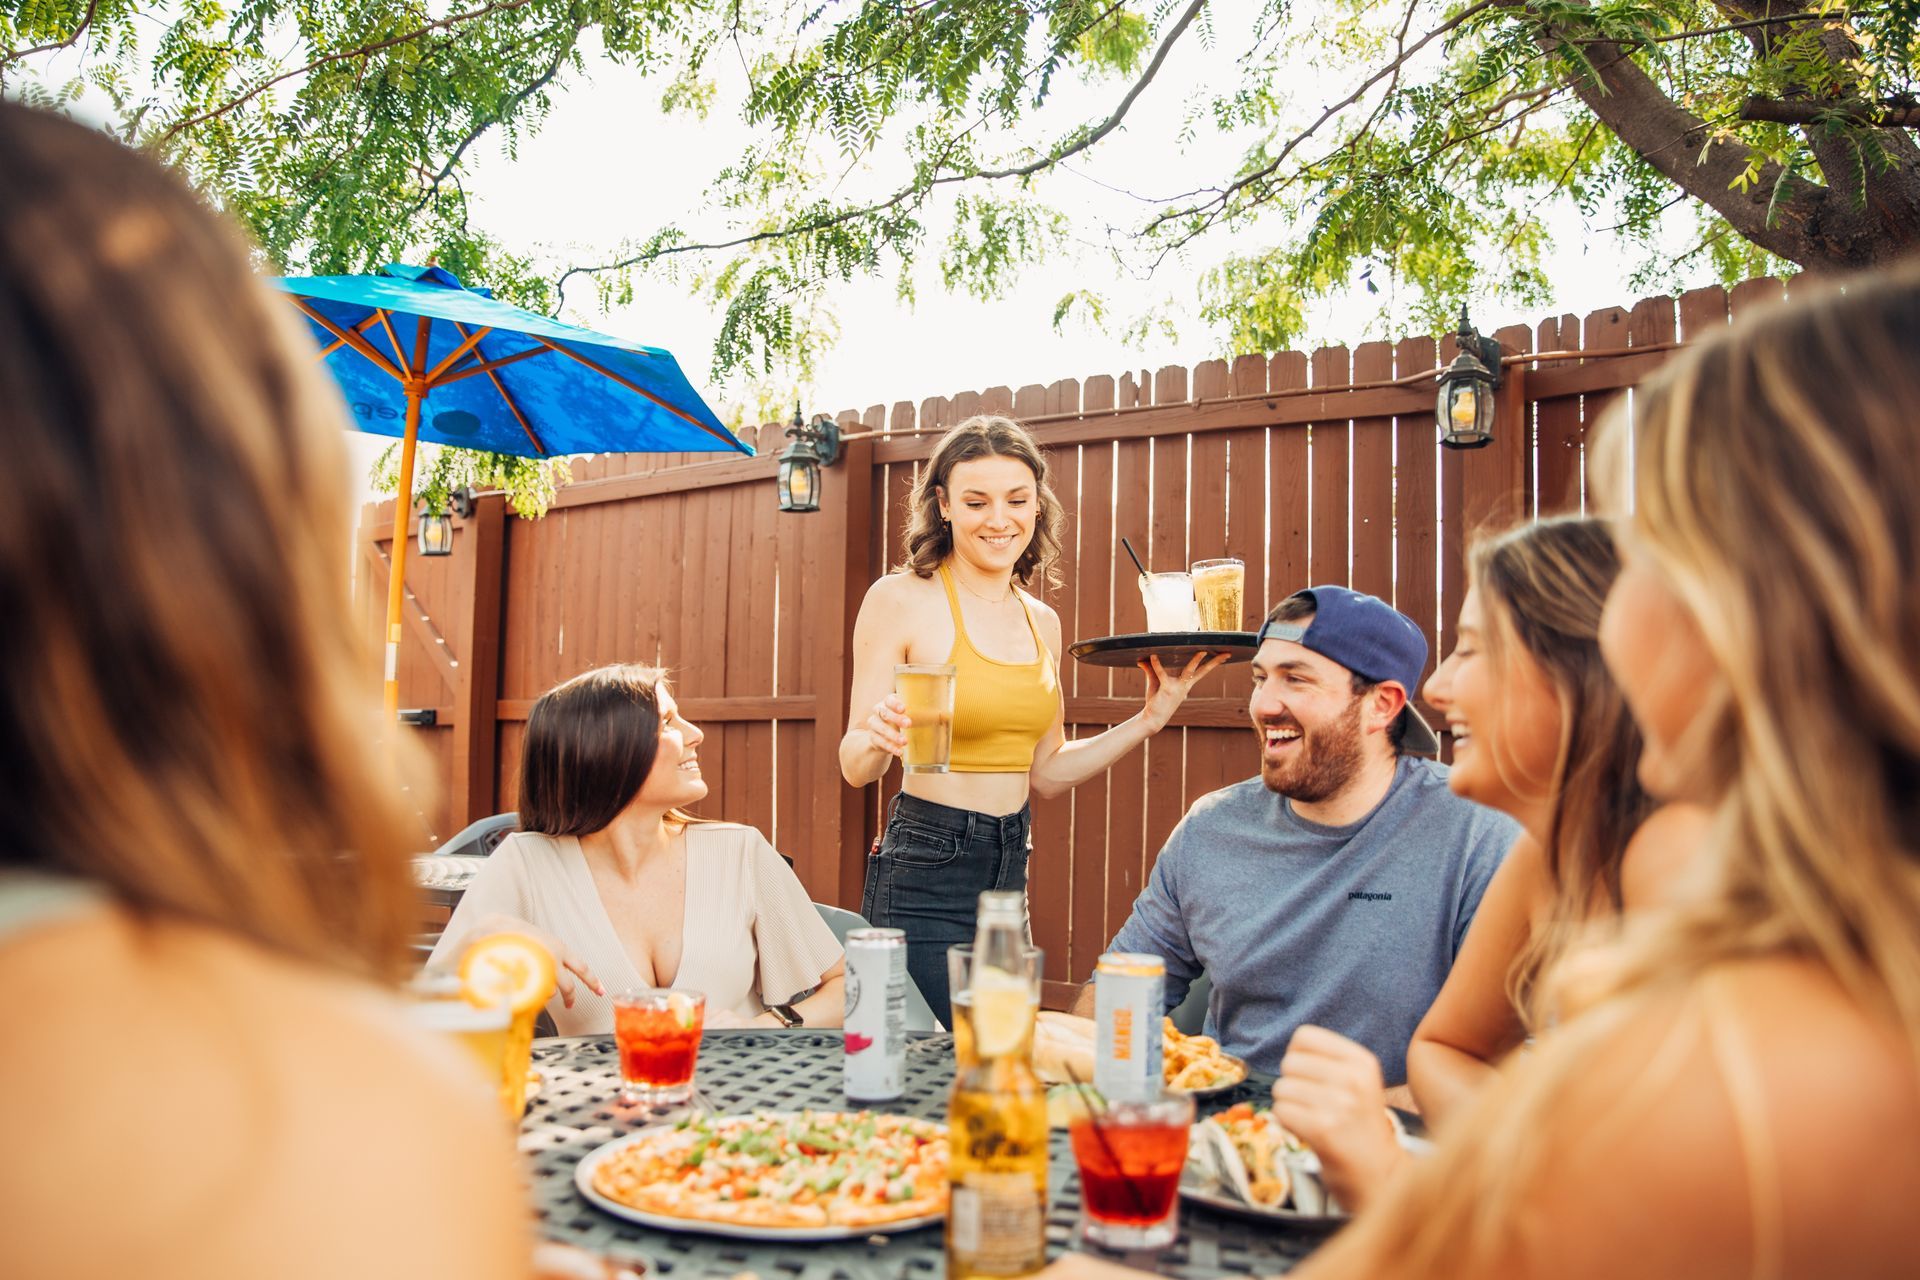 Dine Outside With Friends in the Springtime at The Deuce Pub & Pit in Columbia, MO